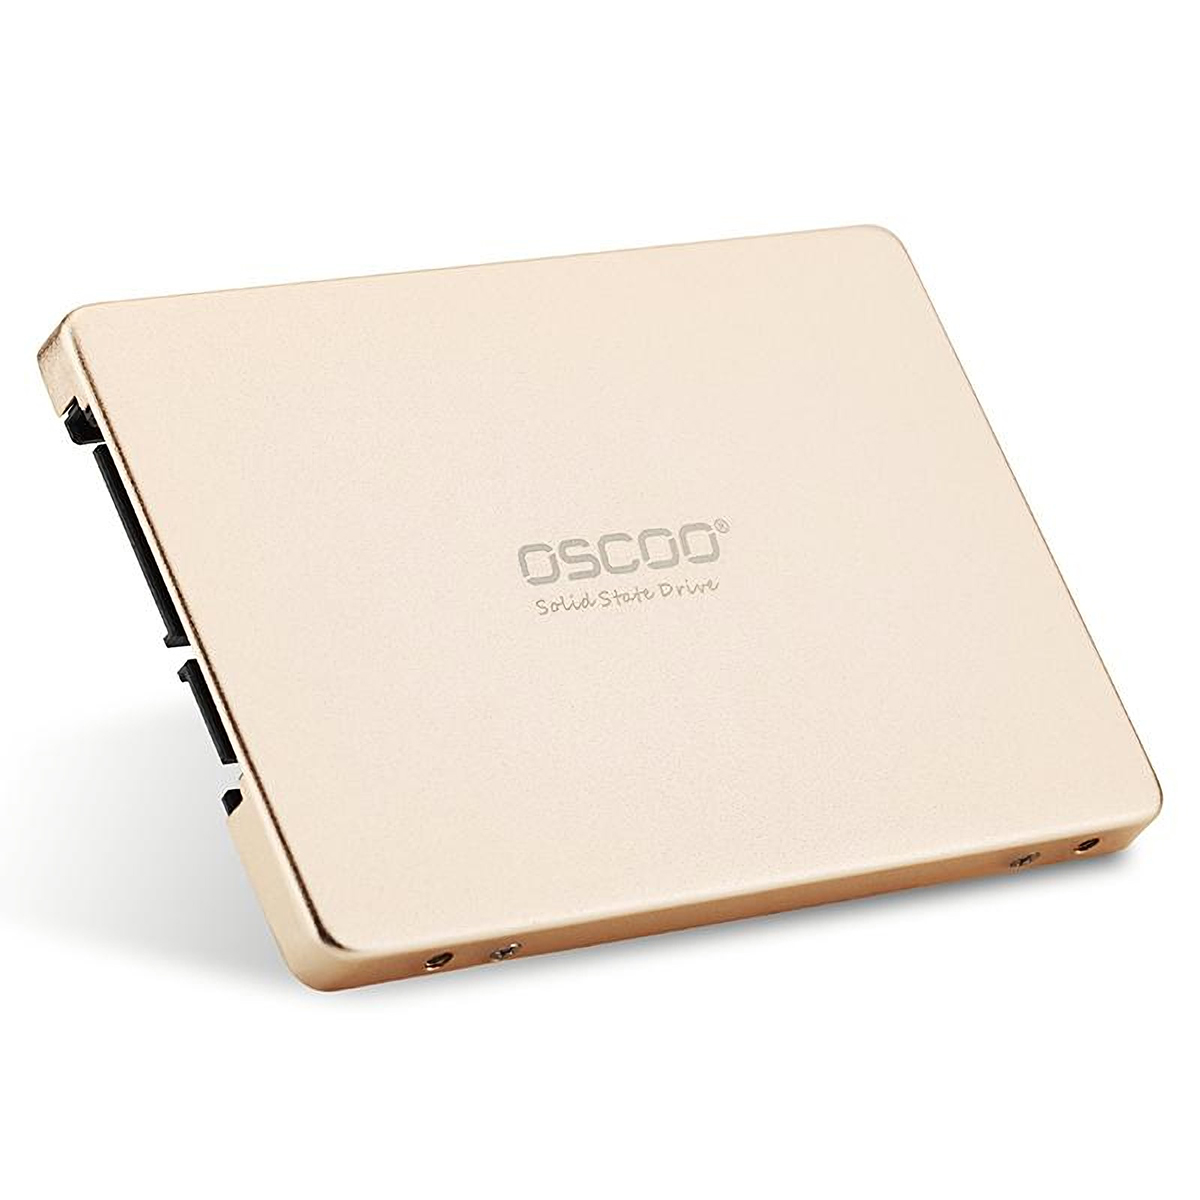 OSCOO-64GB-25-inch-SATA3-SSD-Solid-State-Drive-Aluminium-alloy-Internal-Hard-Disk-Support-TRIM-1296343-4